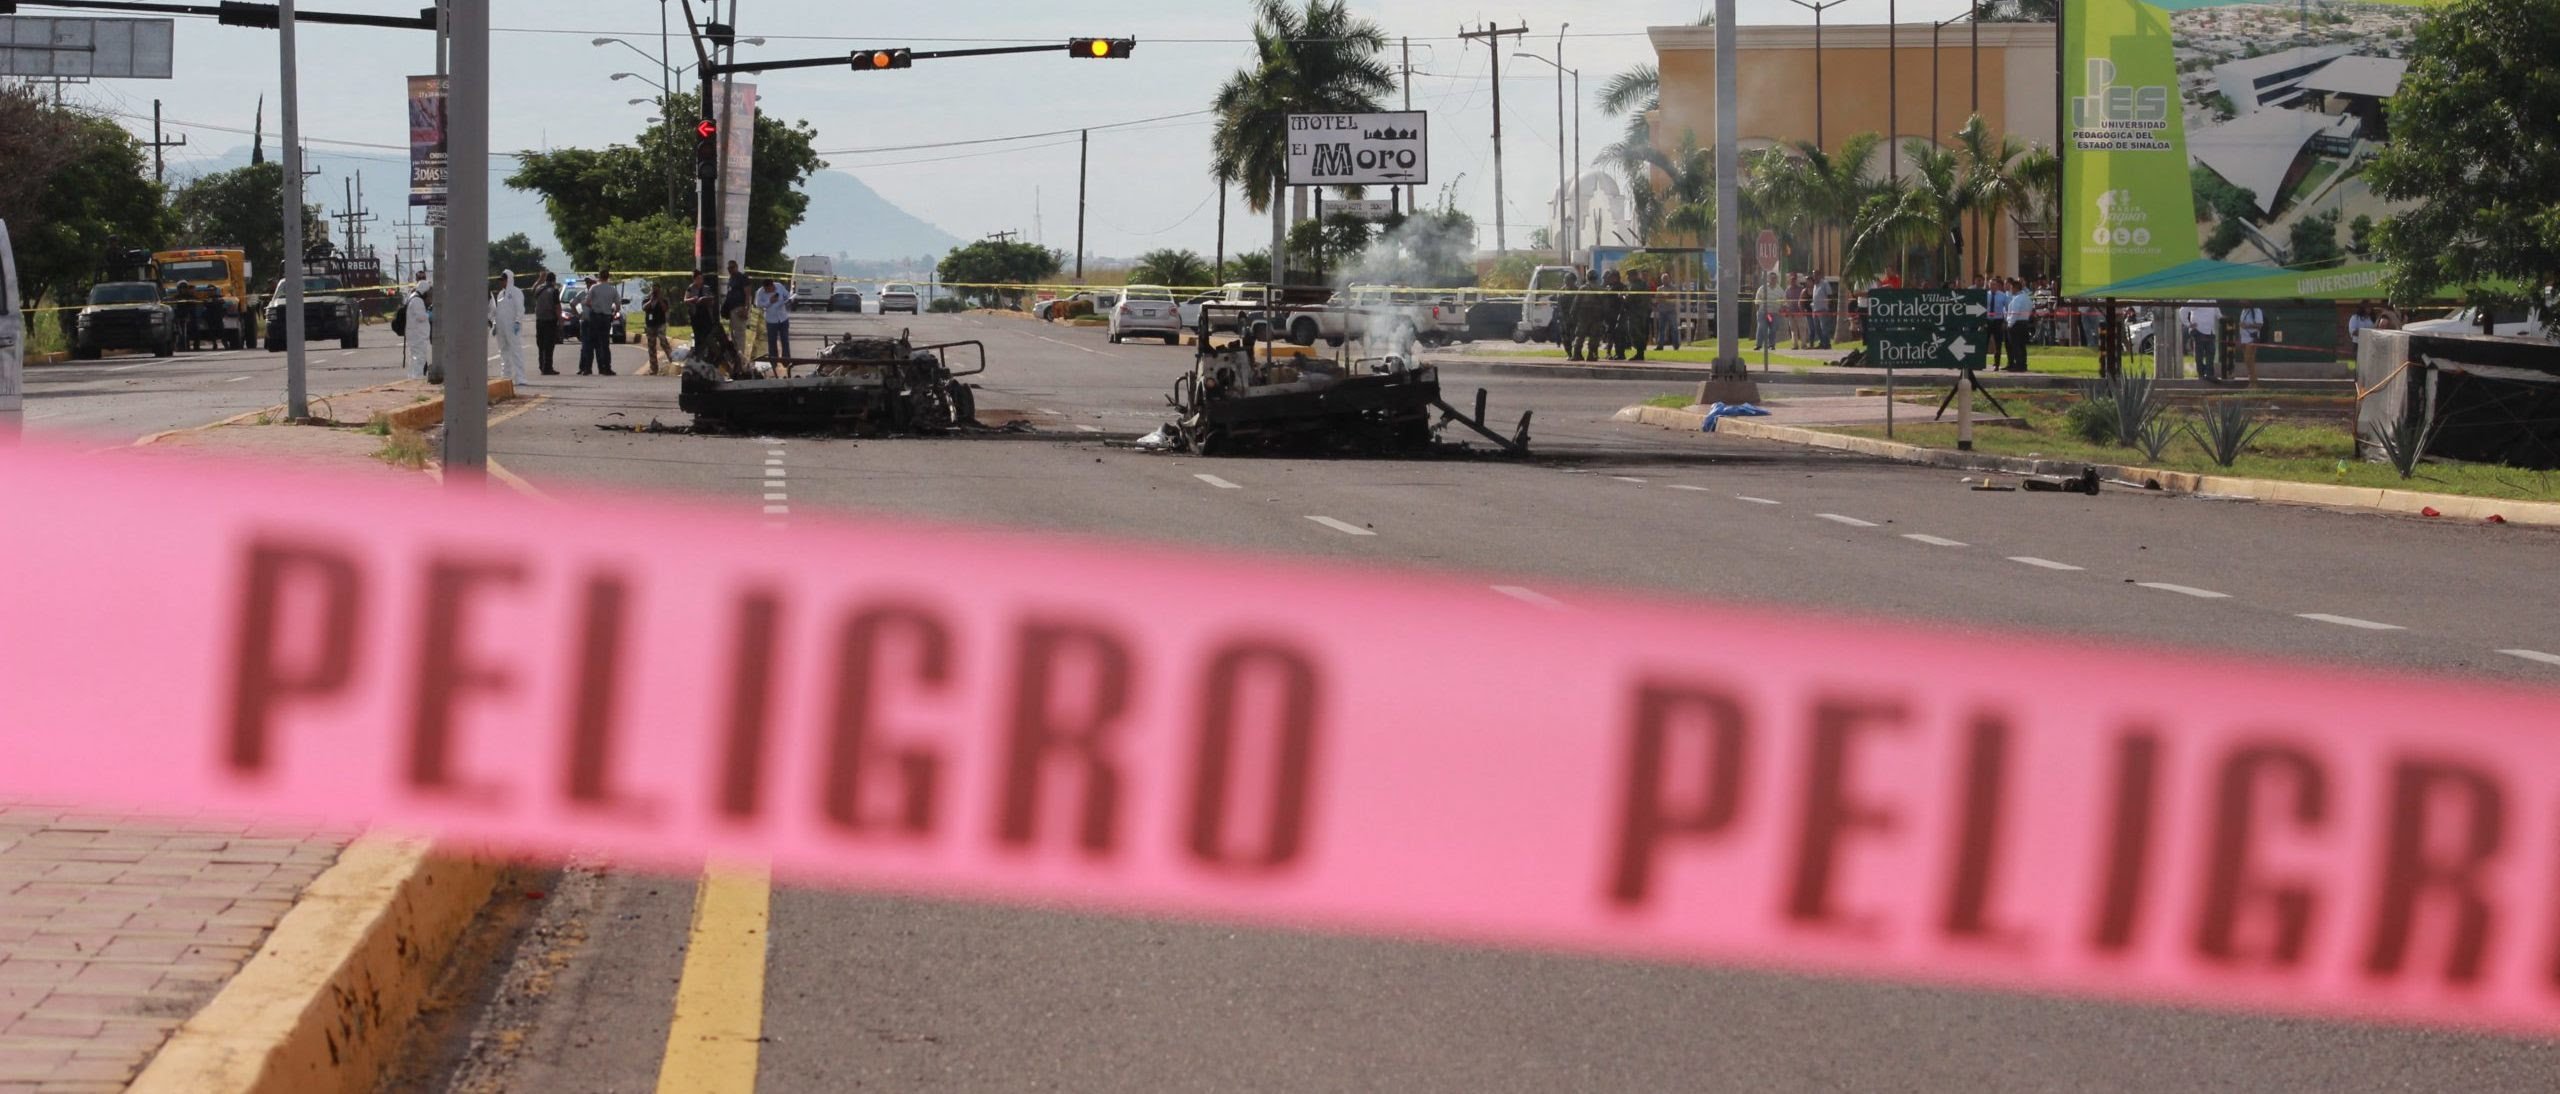 US Consulate Issues Shelter-In-Place Order As Cartel Battles Ravage Northern Mexico